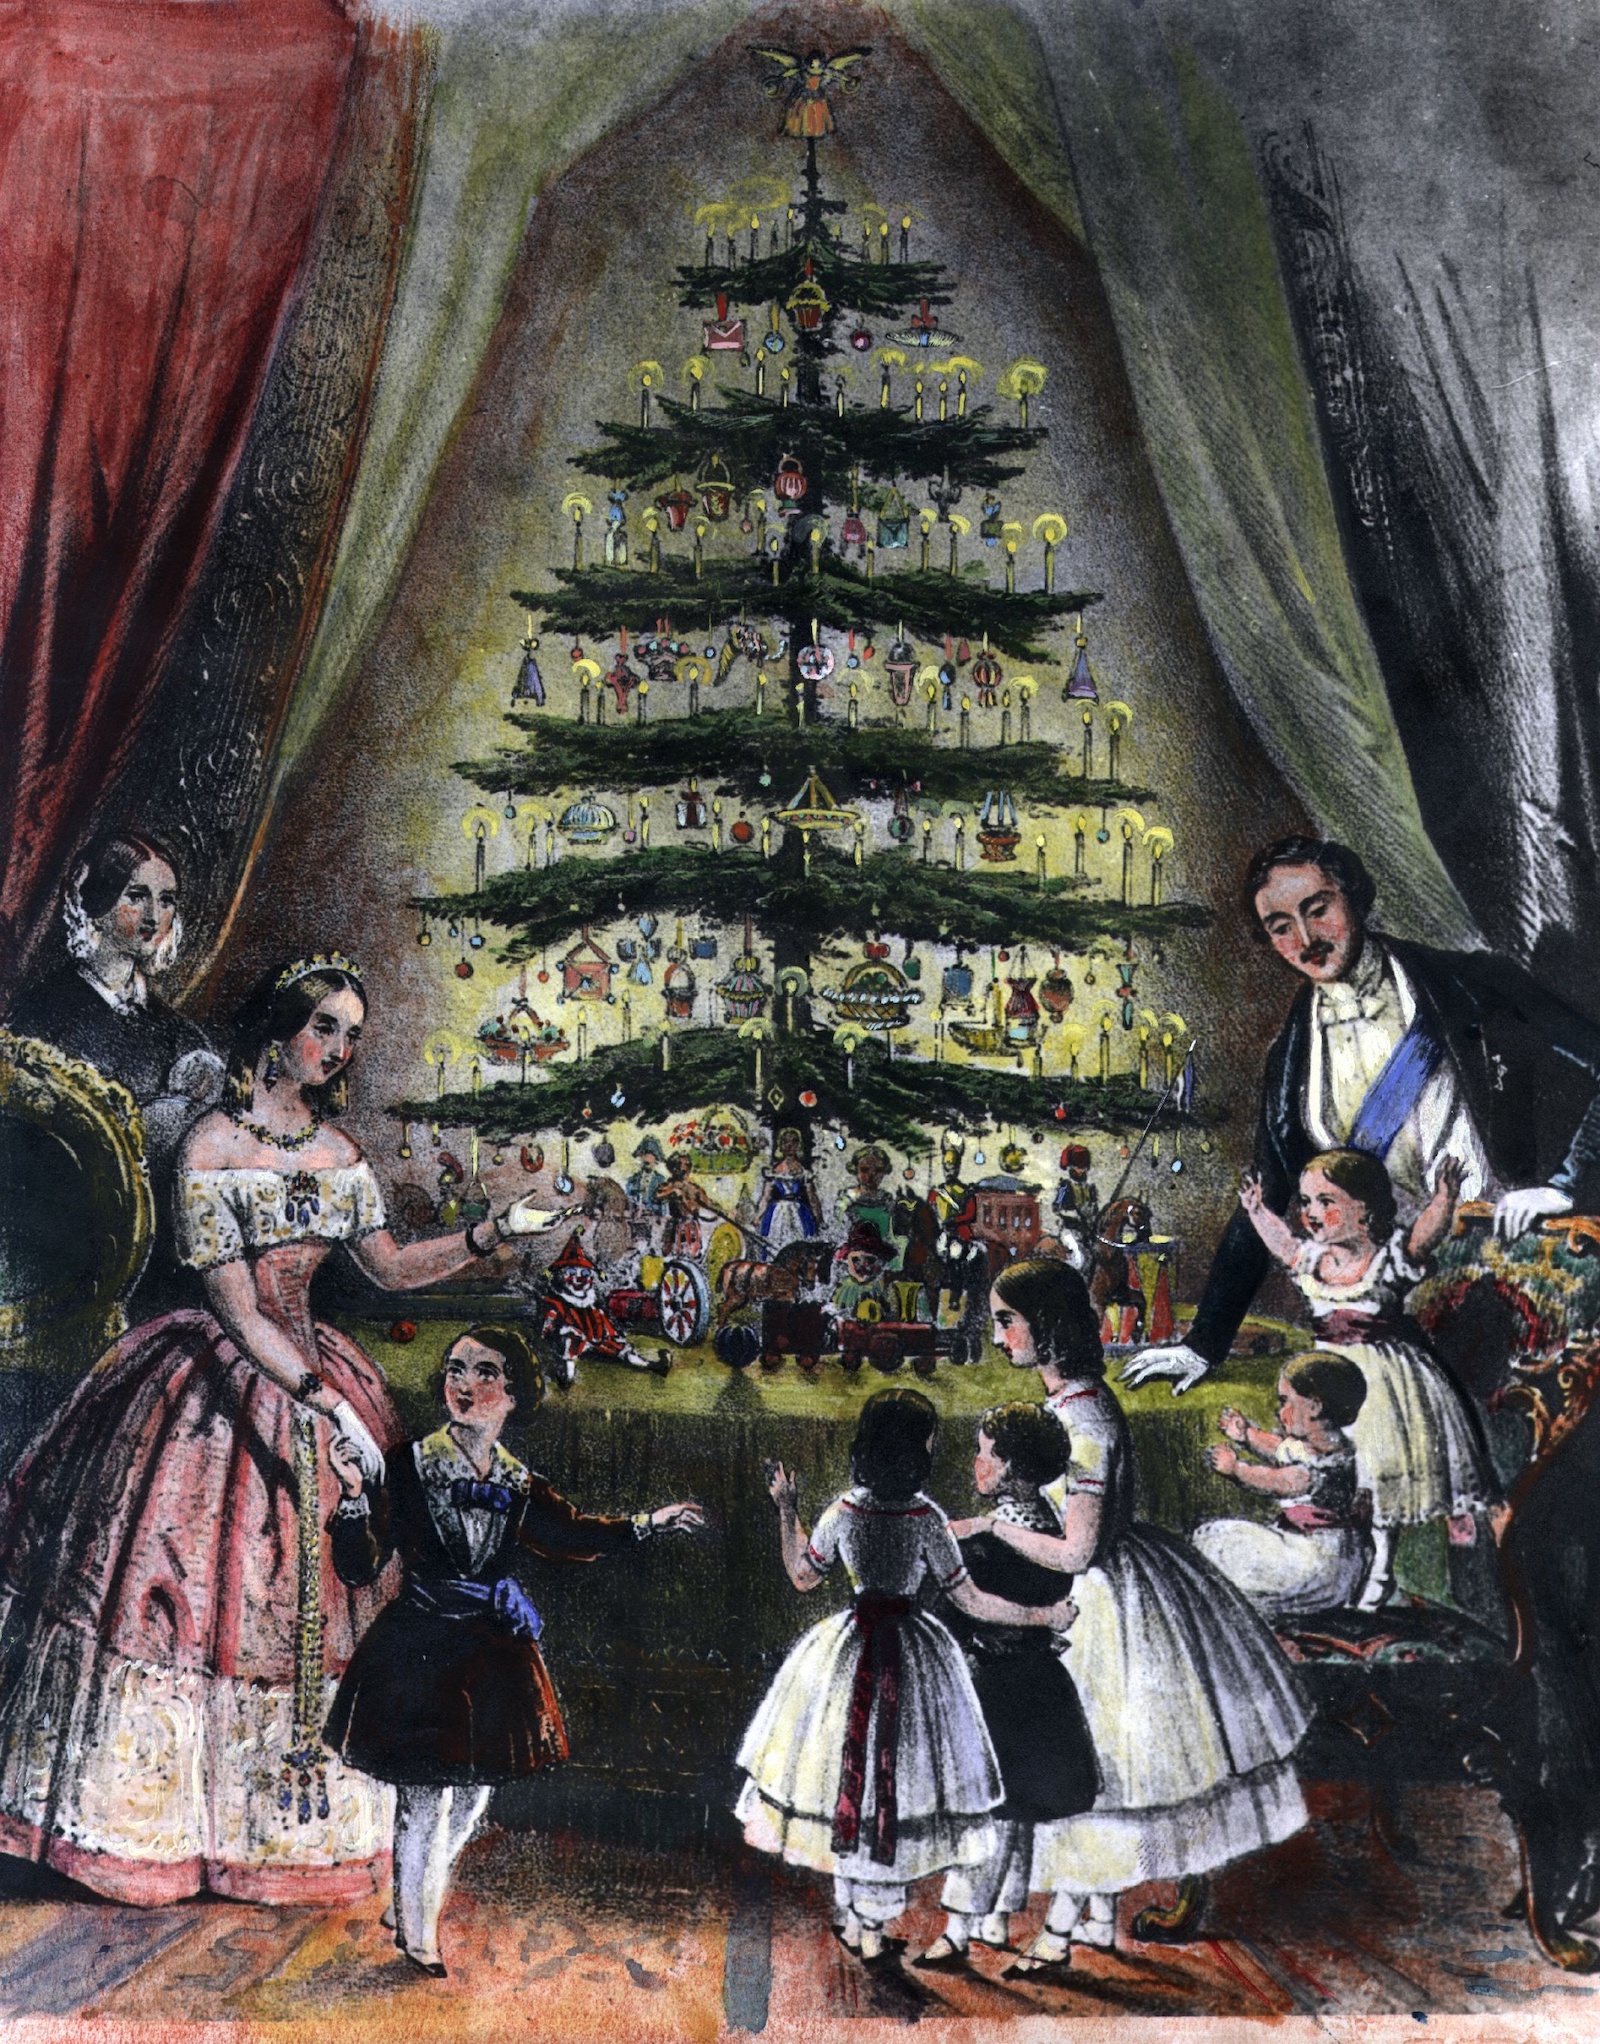 Queen Victoria, Prince Albert and their children gather around a Christmas tree, December 1848. Webster Museum. Public Domain.